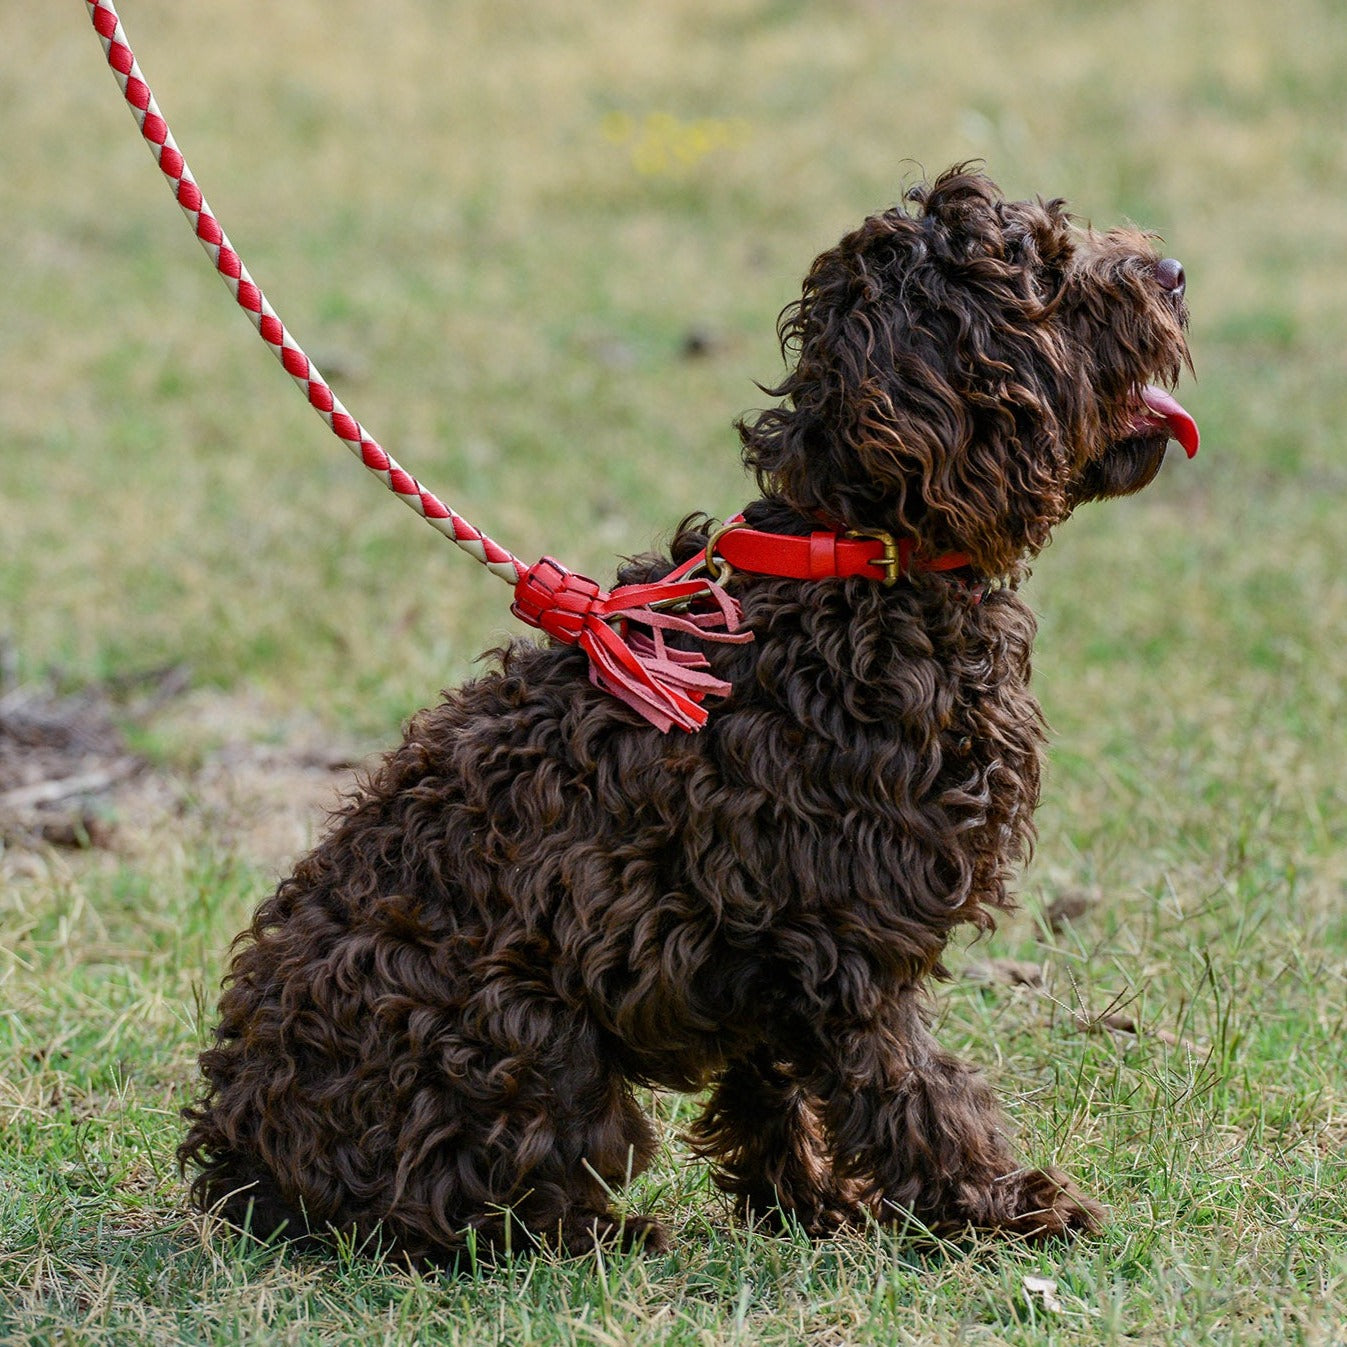 A curly-furred brown dog sits patiently on a grassy field, secured by a Georgie Paws Swanky Lead- Red, attentively looking to the side.